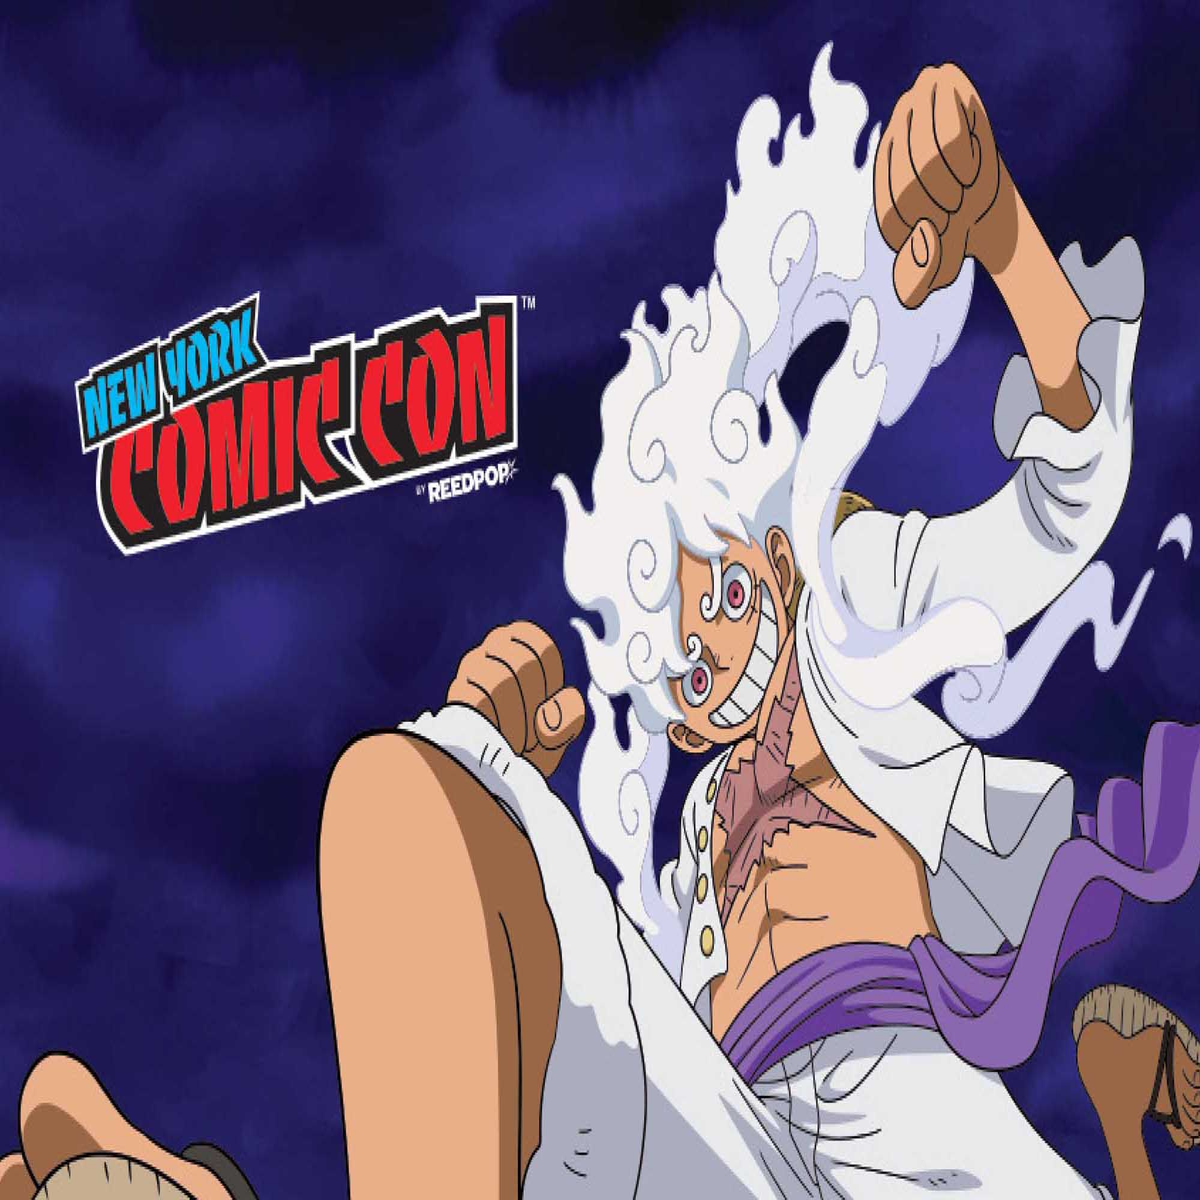 ONE PIECE Crunchyroll Anime 2019 NYCC New York Comic Con Exclusive